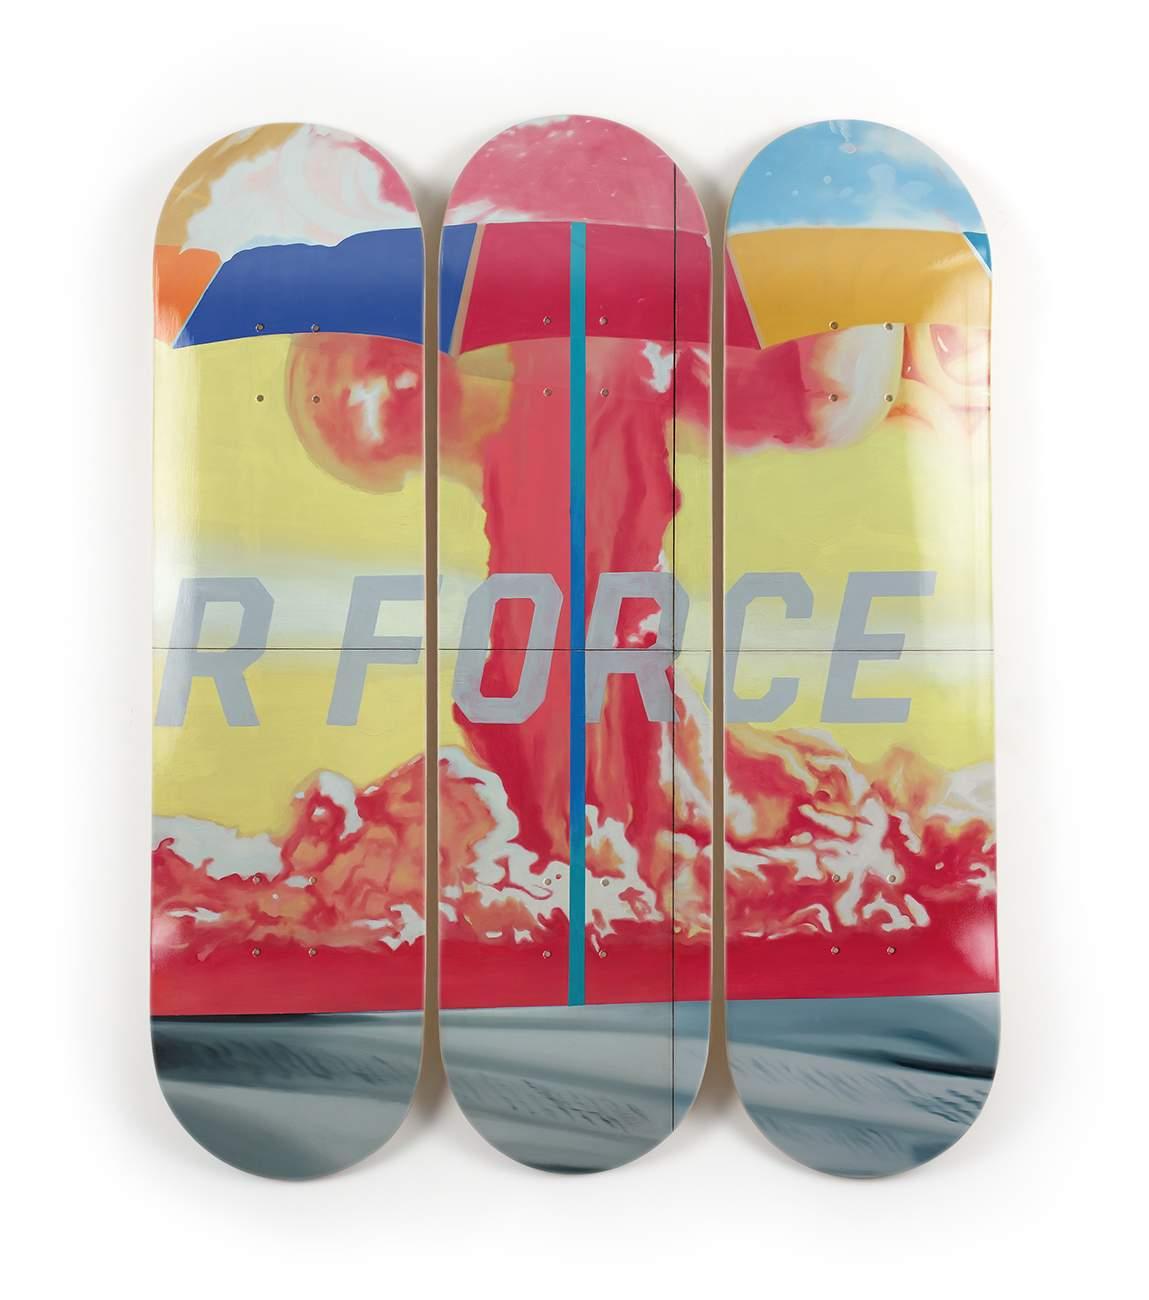 James Rosenquist - F-111 TRIPTYCH A (ATOM)
Date of creation: 2021
Medium: Digital print on Canadian maple wood
Edition: 100
Size: 80 x 20 cm (each skate)
Condition: In mint conditions and never displayed
This work is formed by three skate decks made